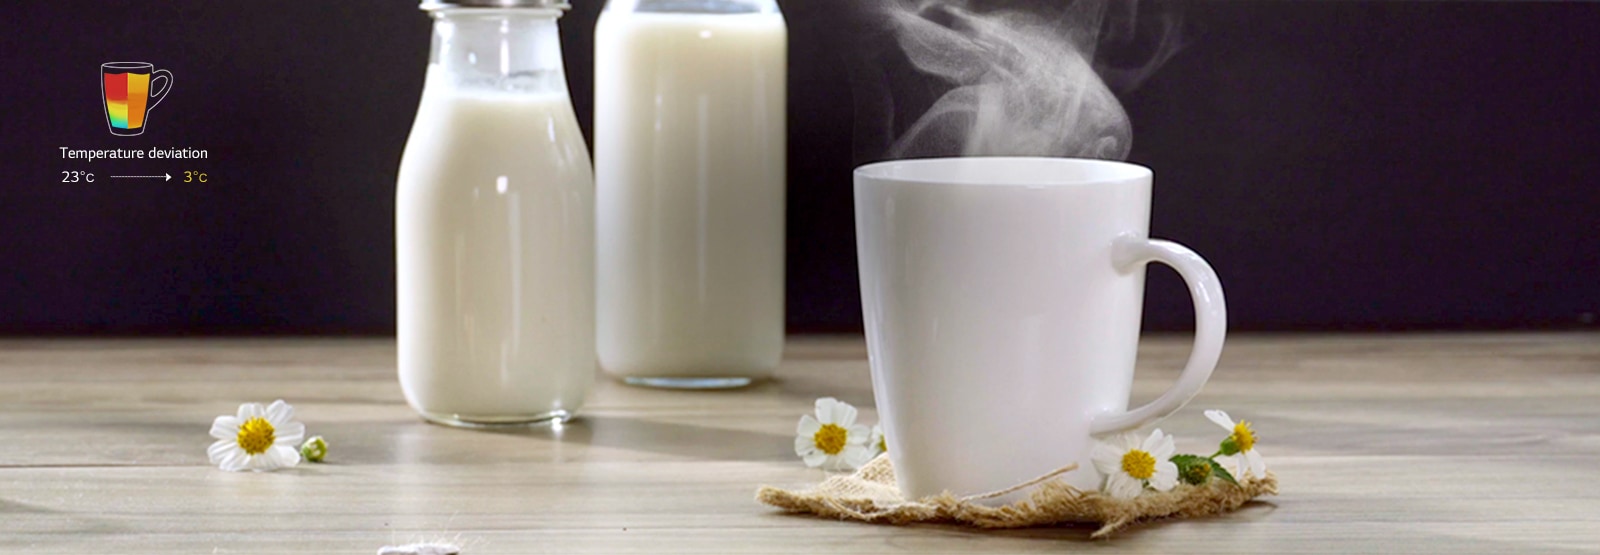 A uniformly heated steaming milk glass.